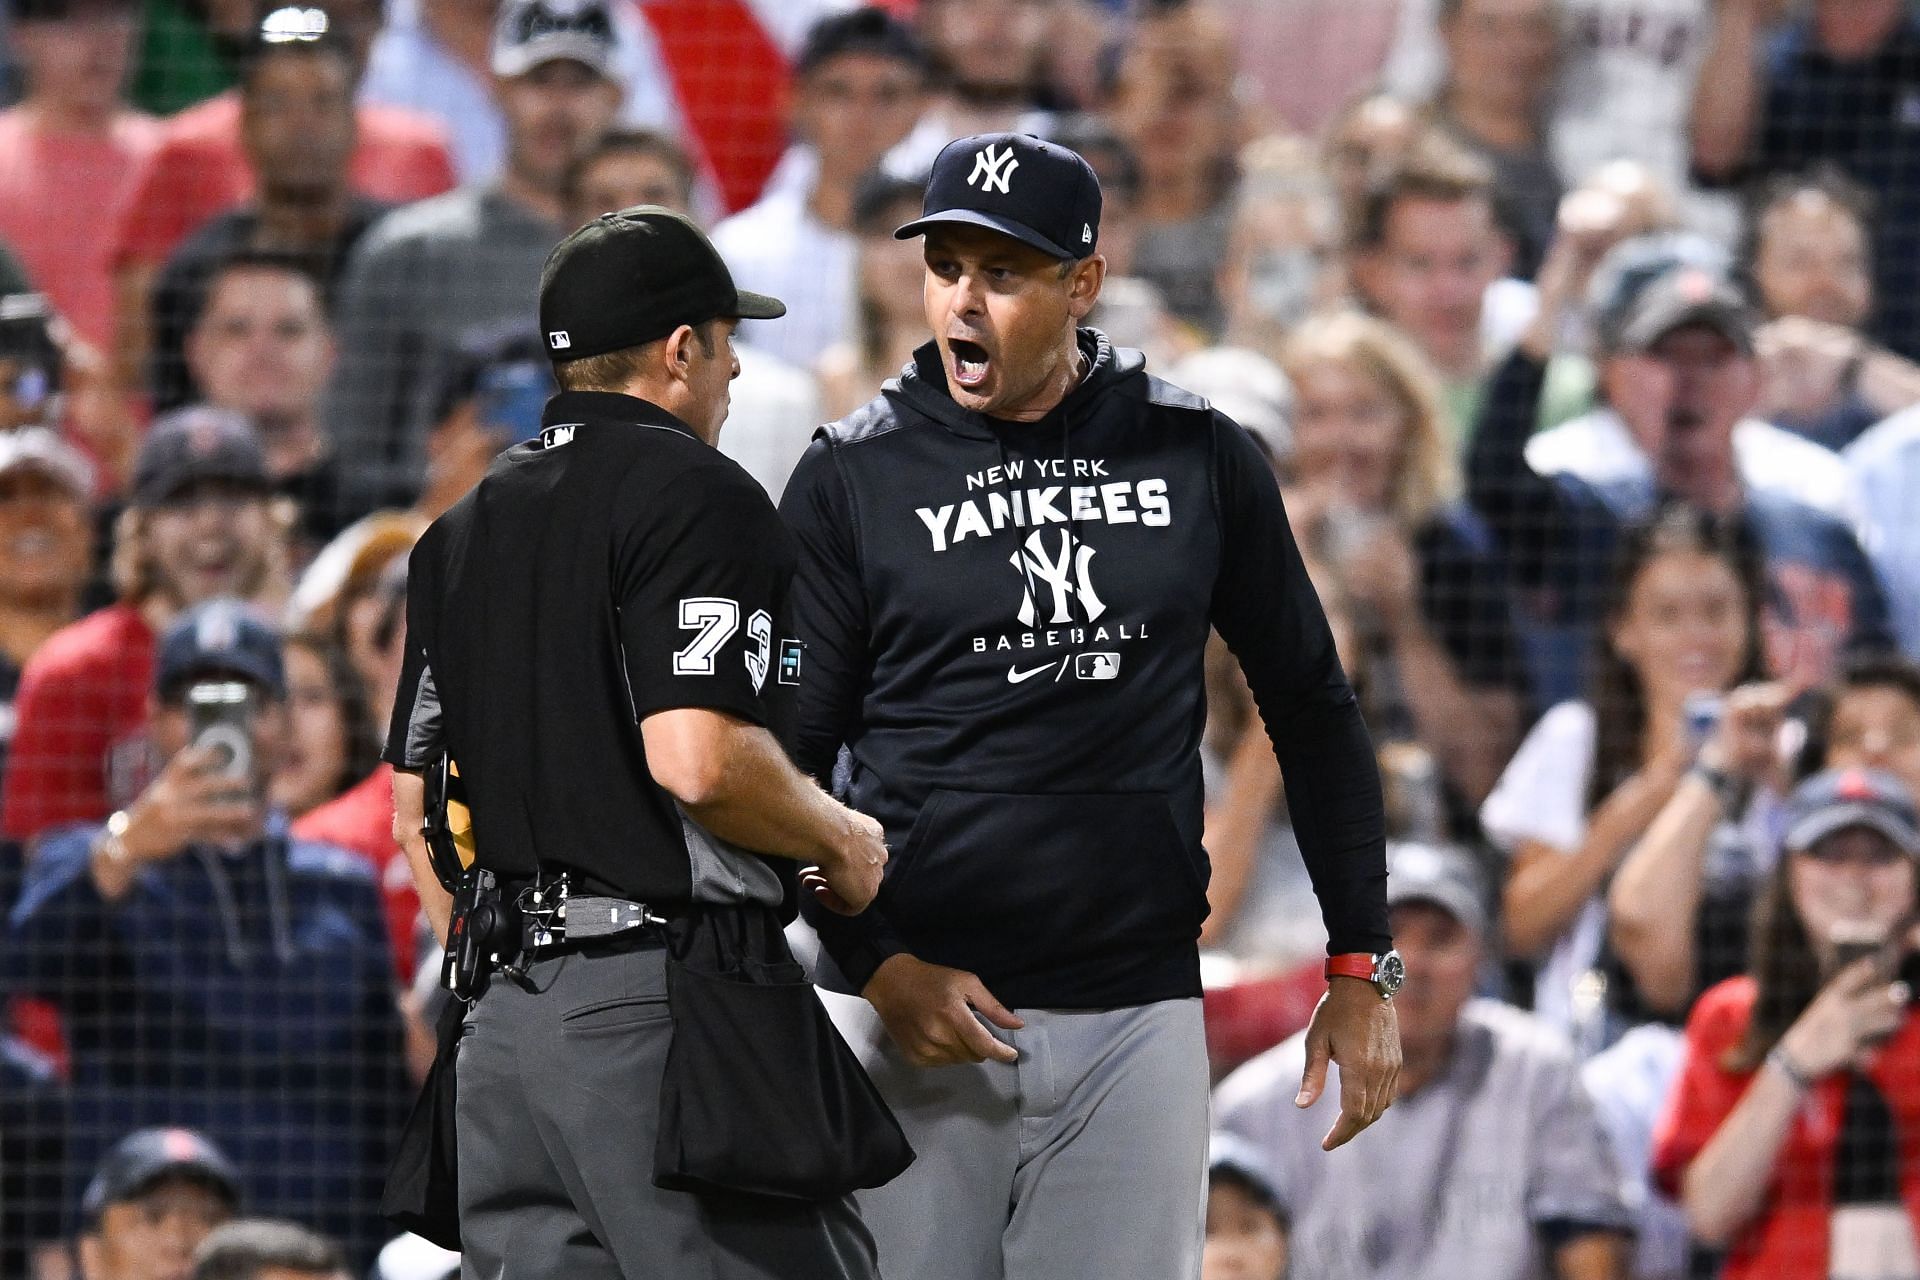 Watch: Aaron Boone unhinged after questionable call by umpire